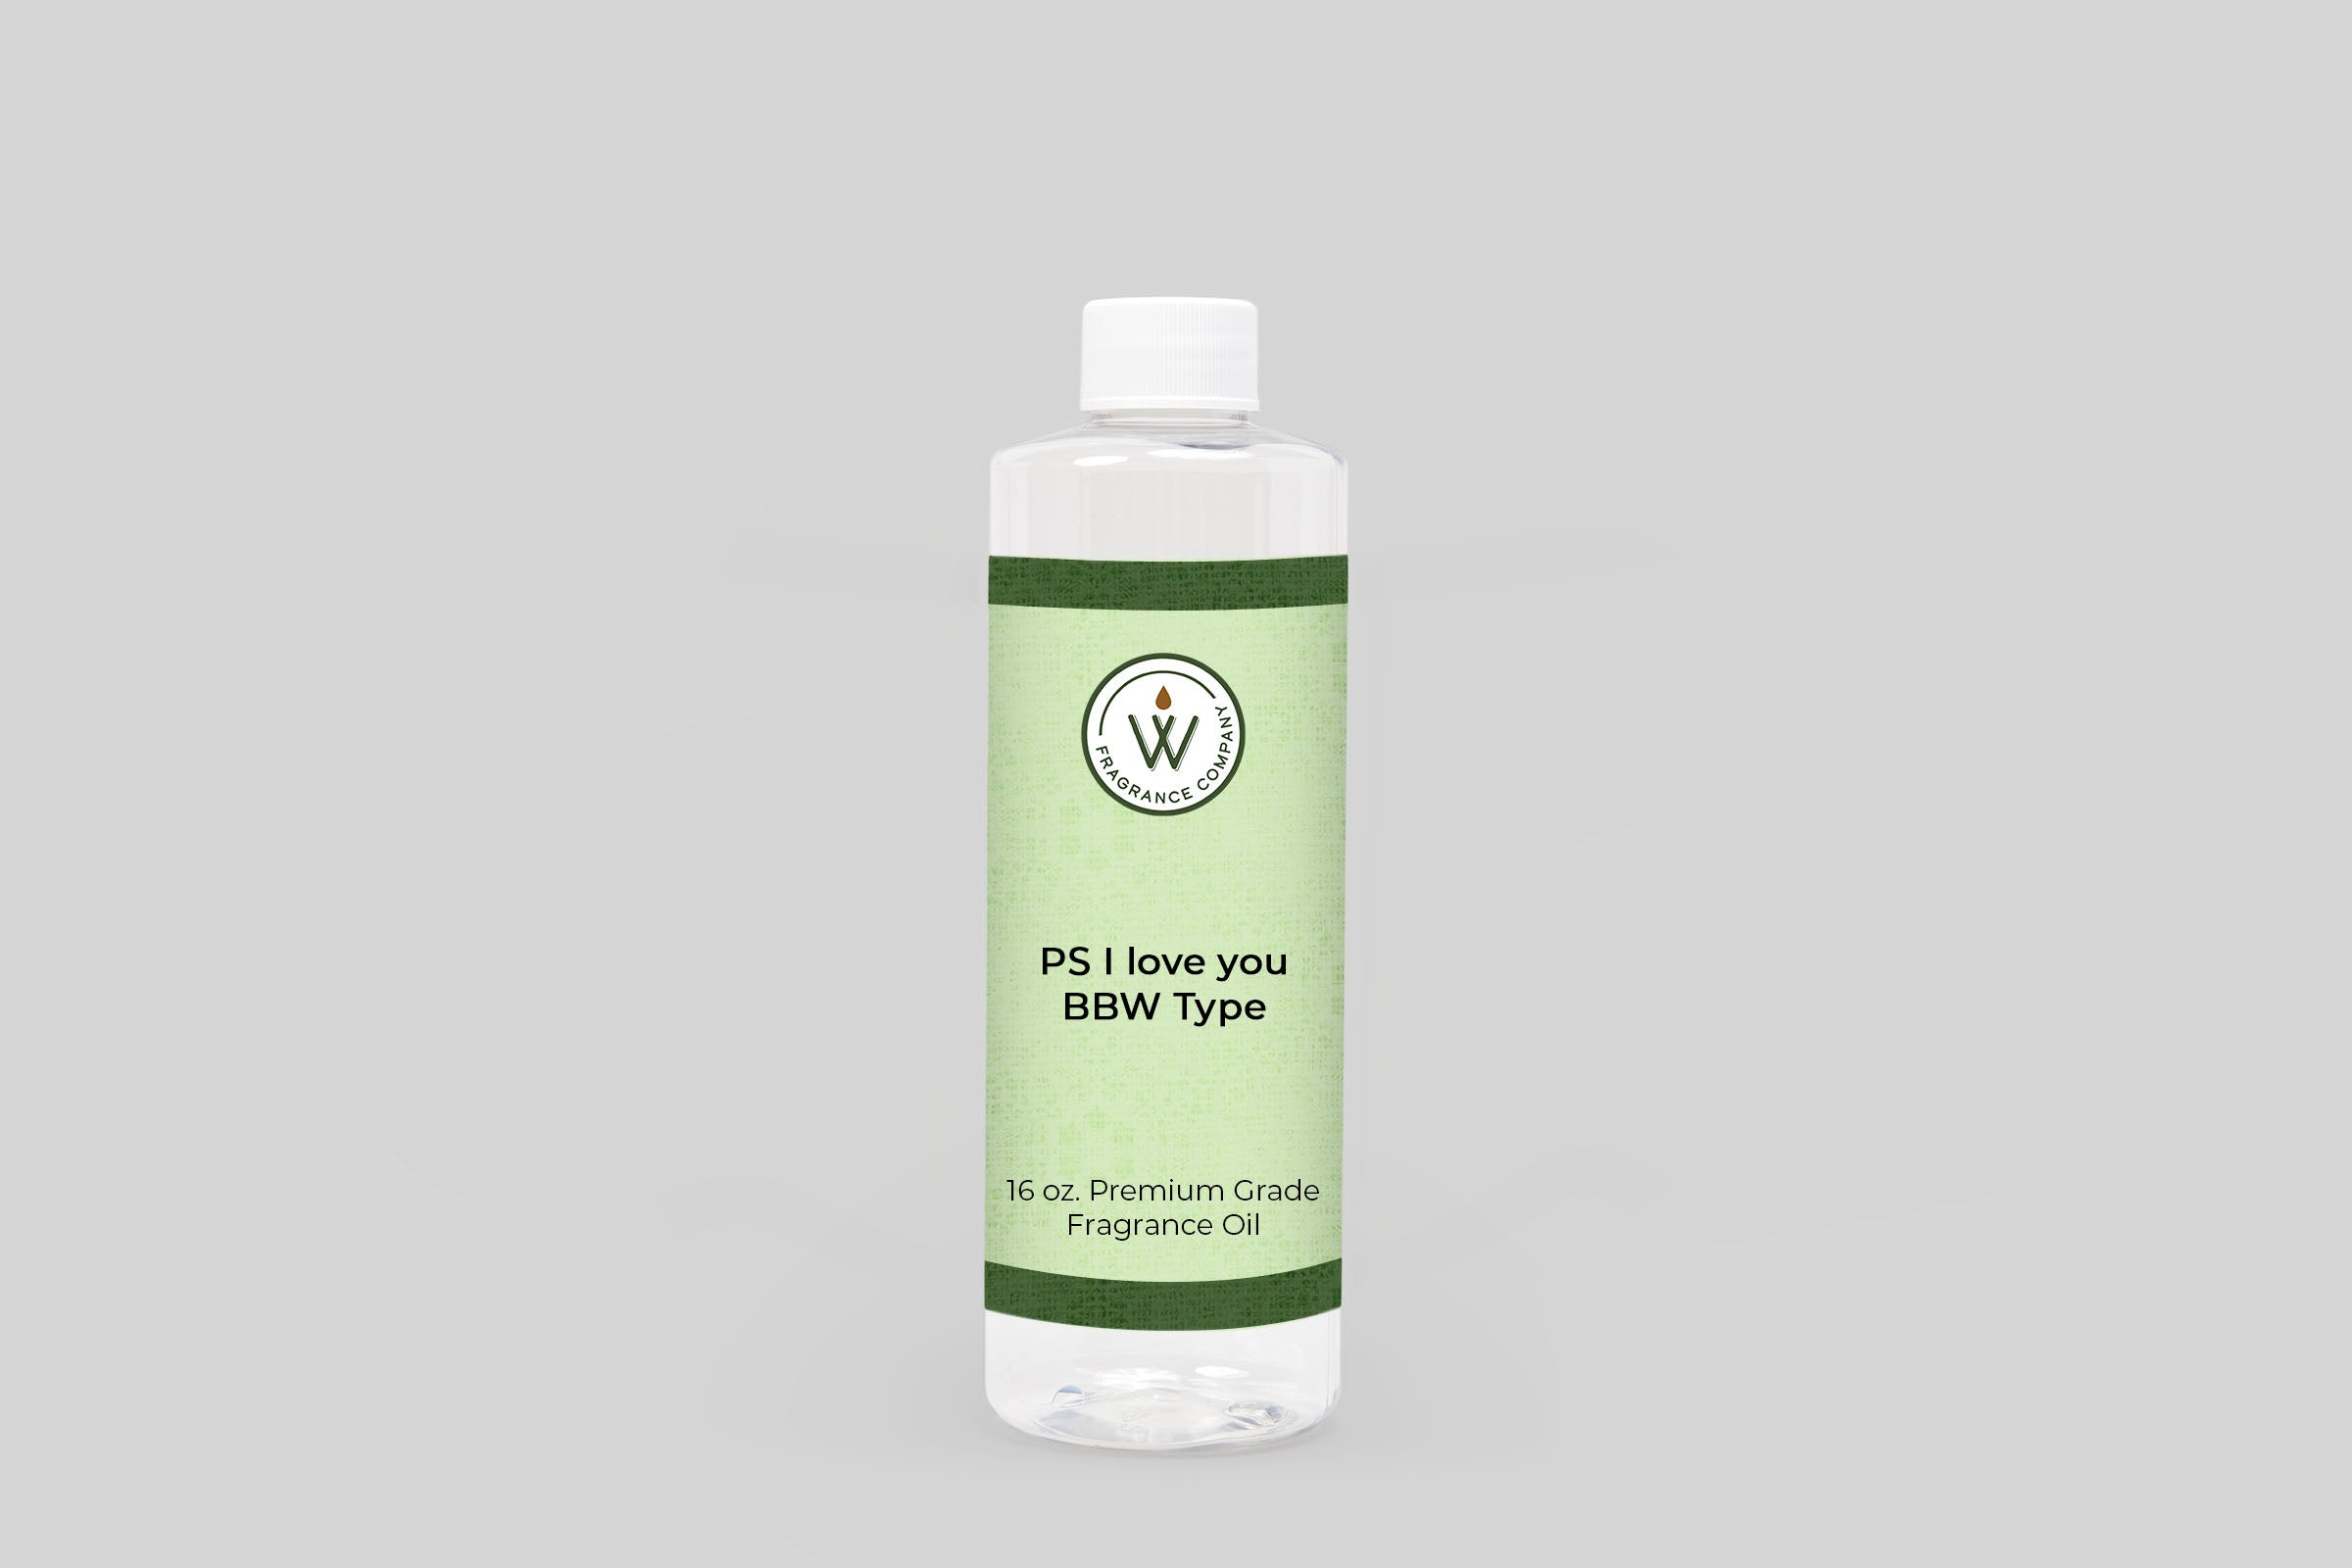 PS I love you BBW Type Fragrance Oil